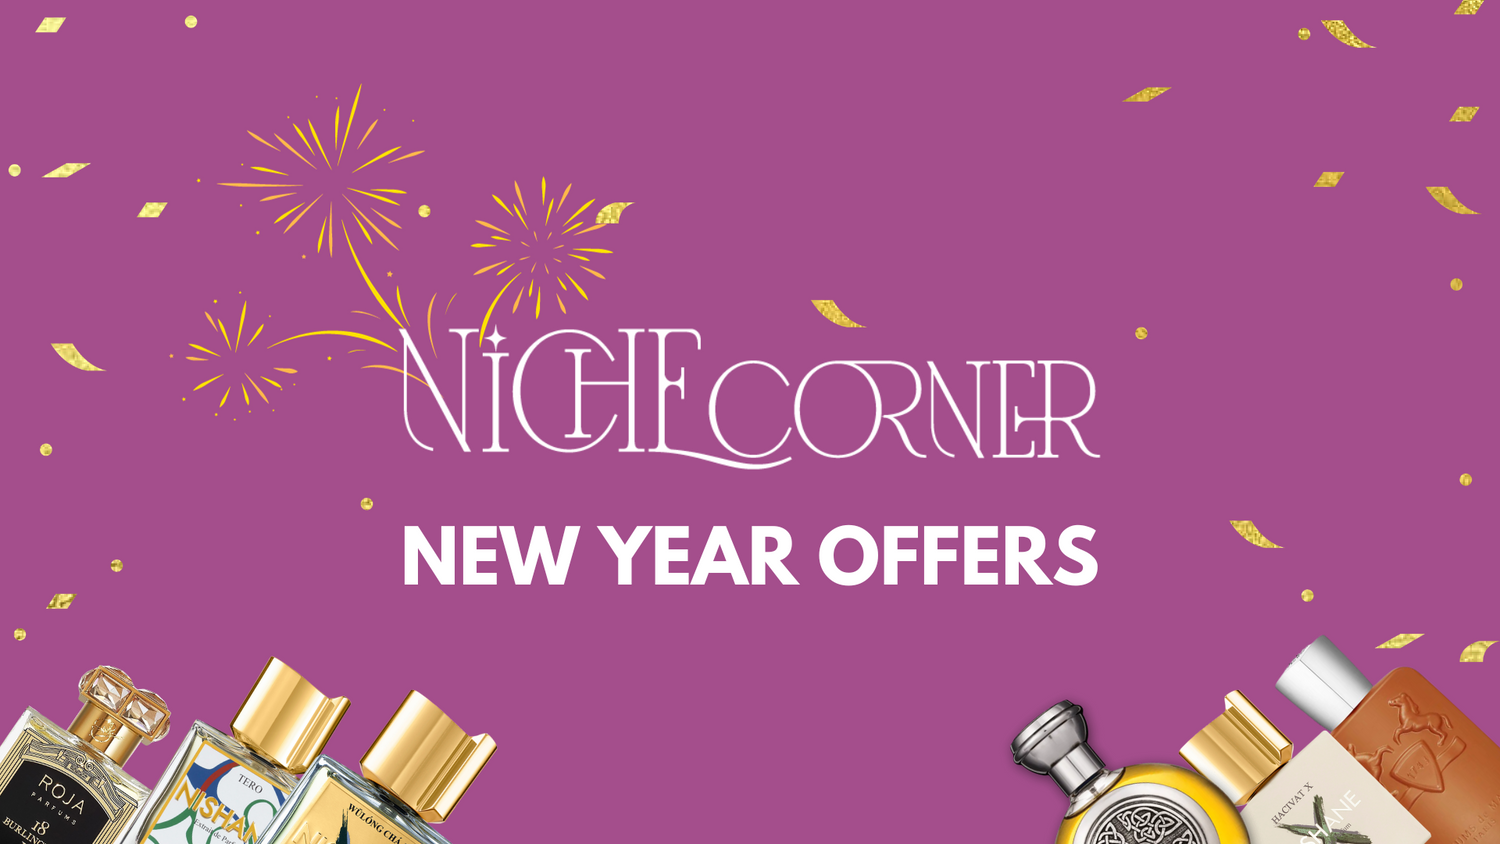 NEW YEAR OFFERS